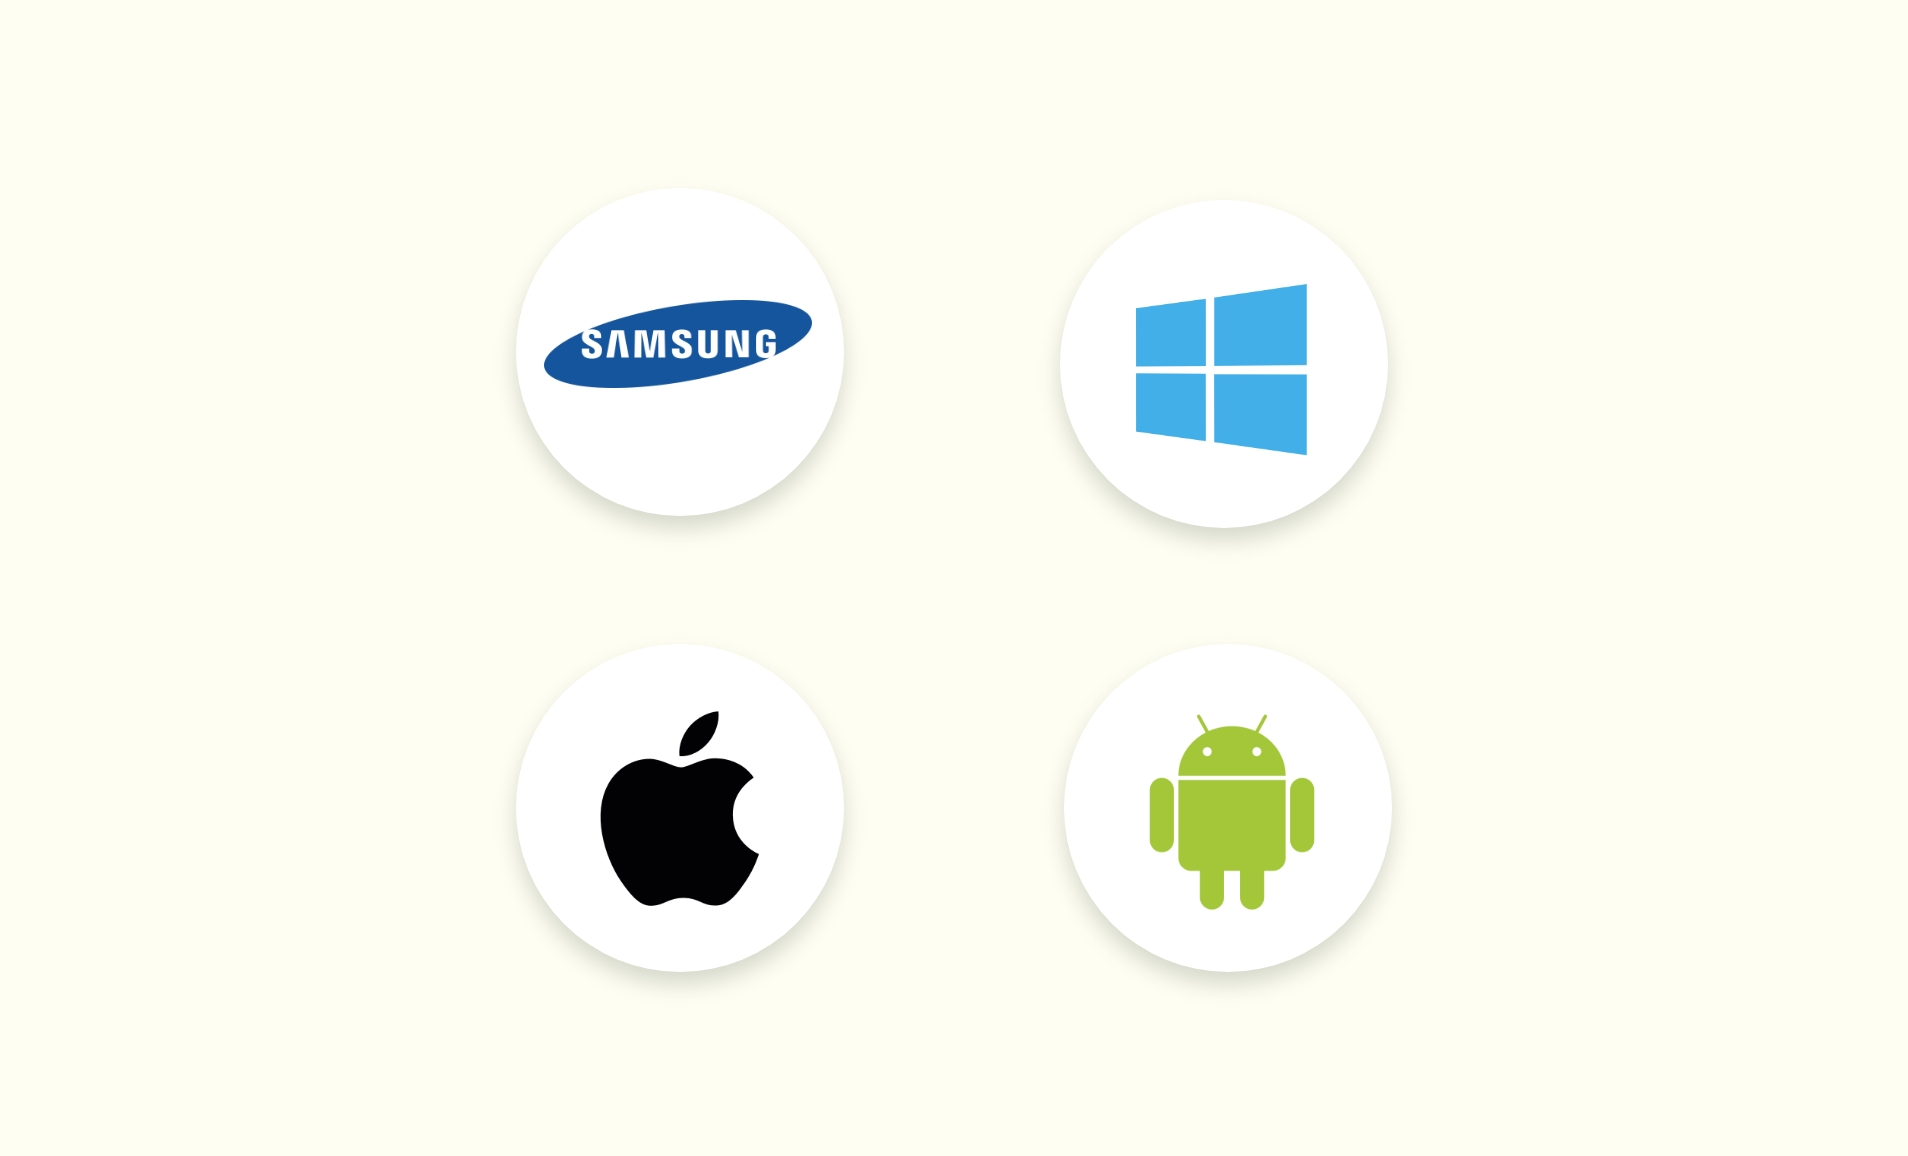 Clock app is supported in OS like Samsung OS, Windows, MacOS and Android.